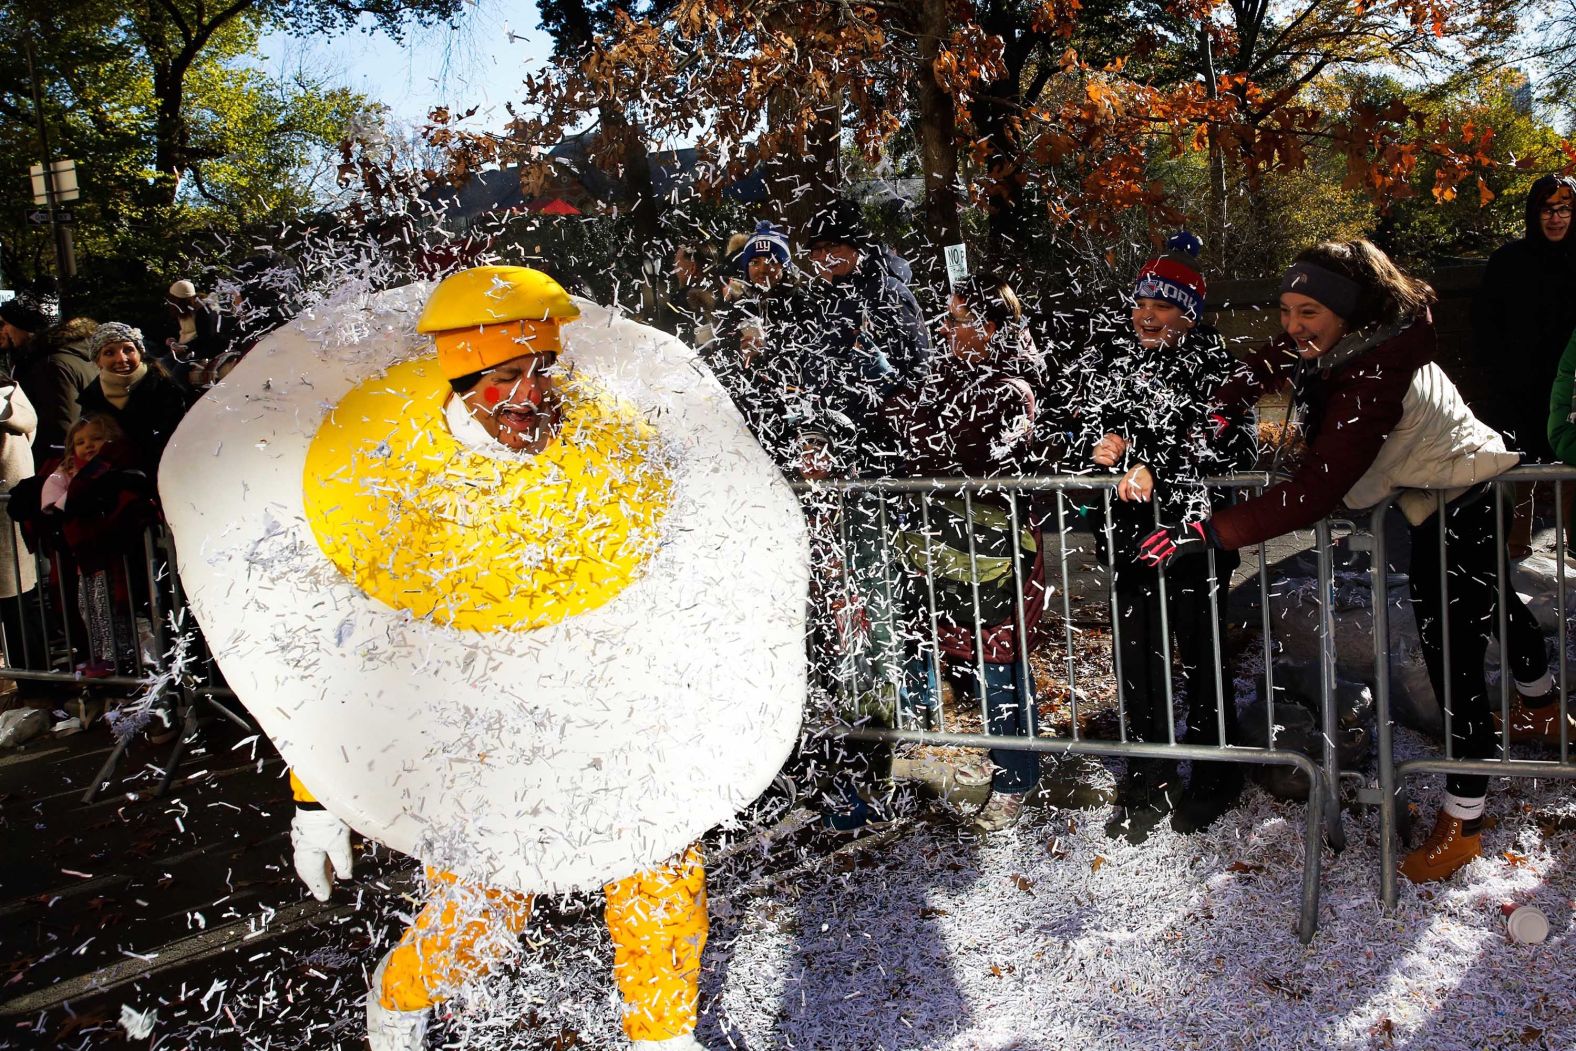 A parade performer is showered in confetti.